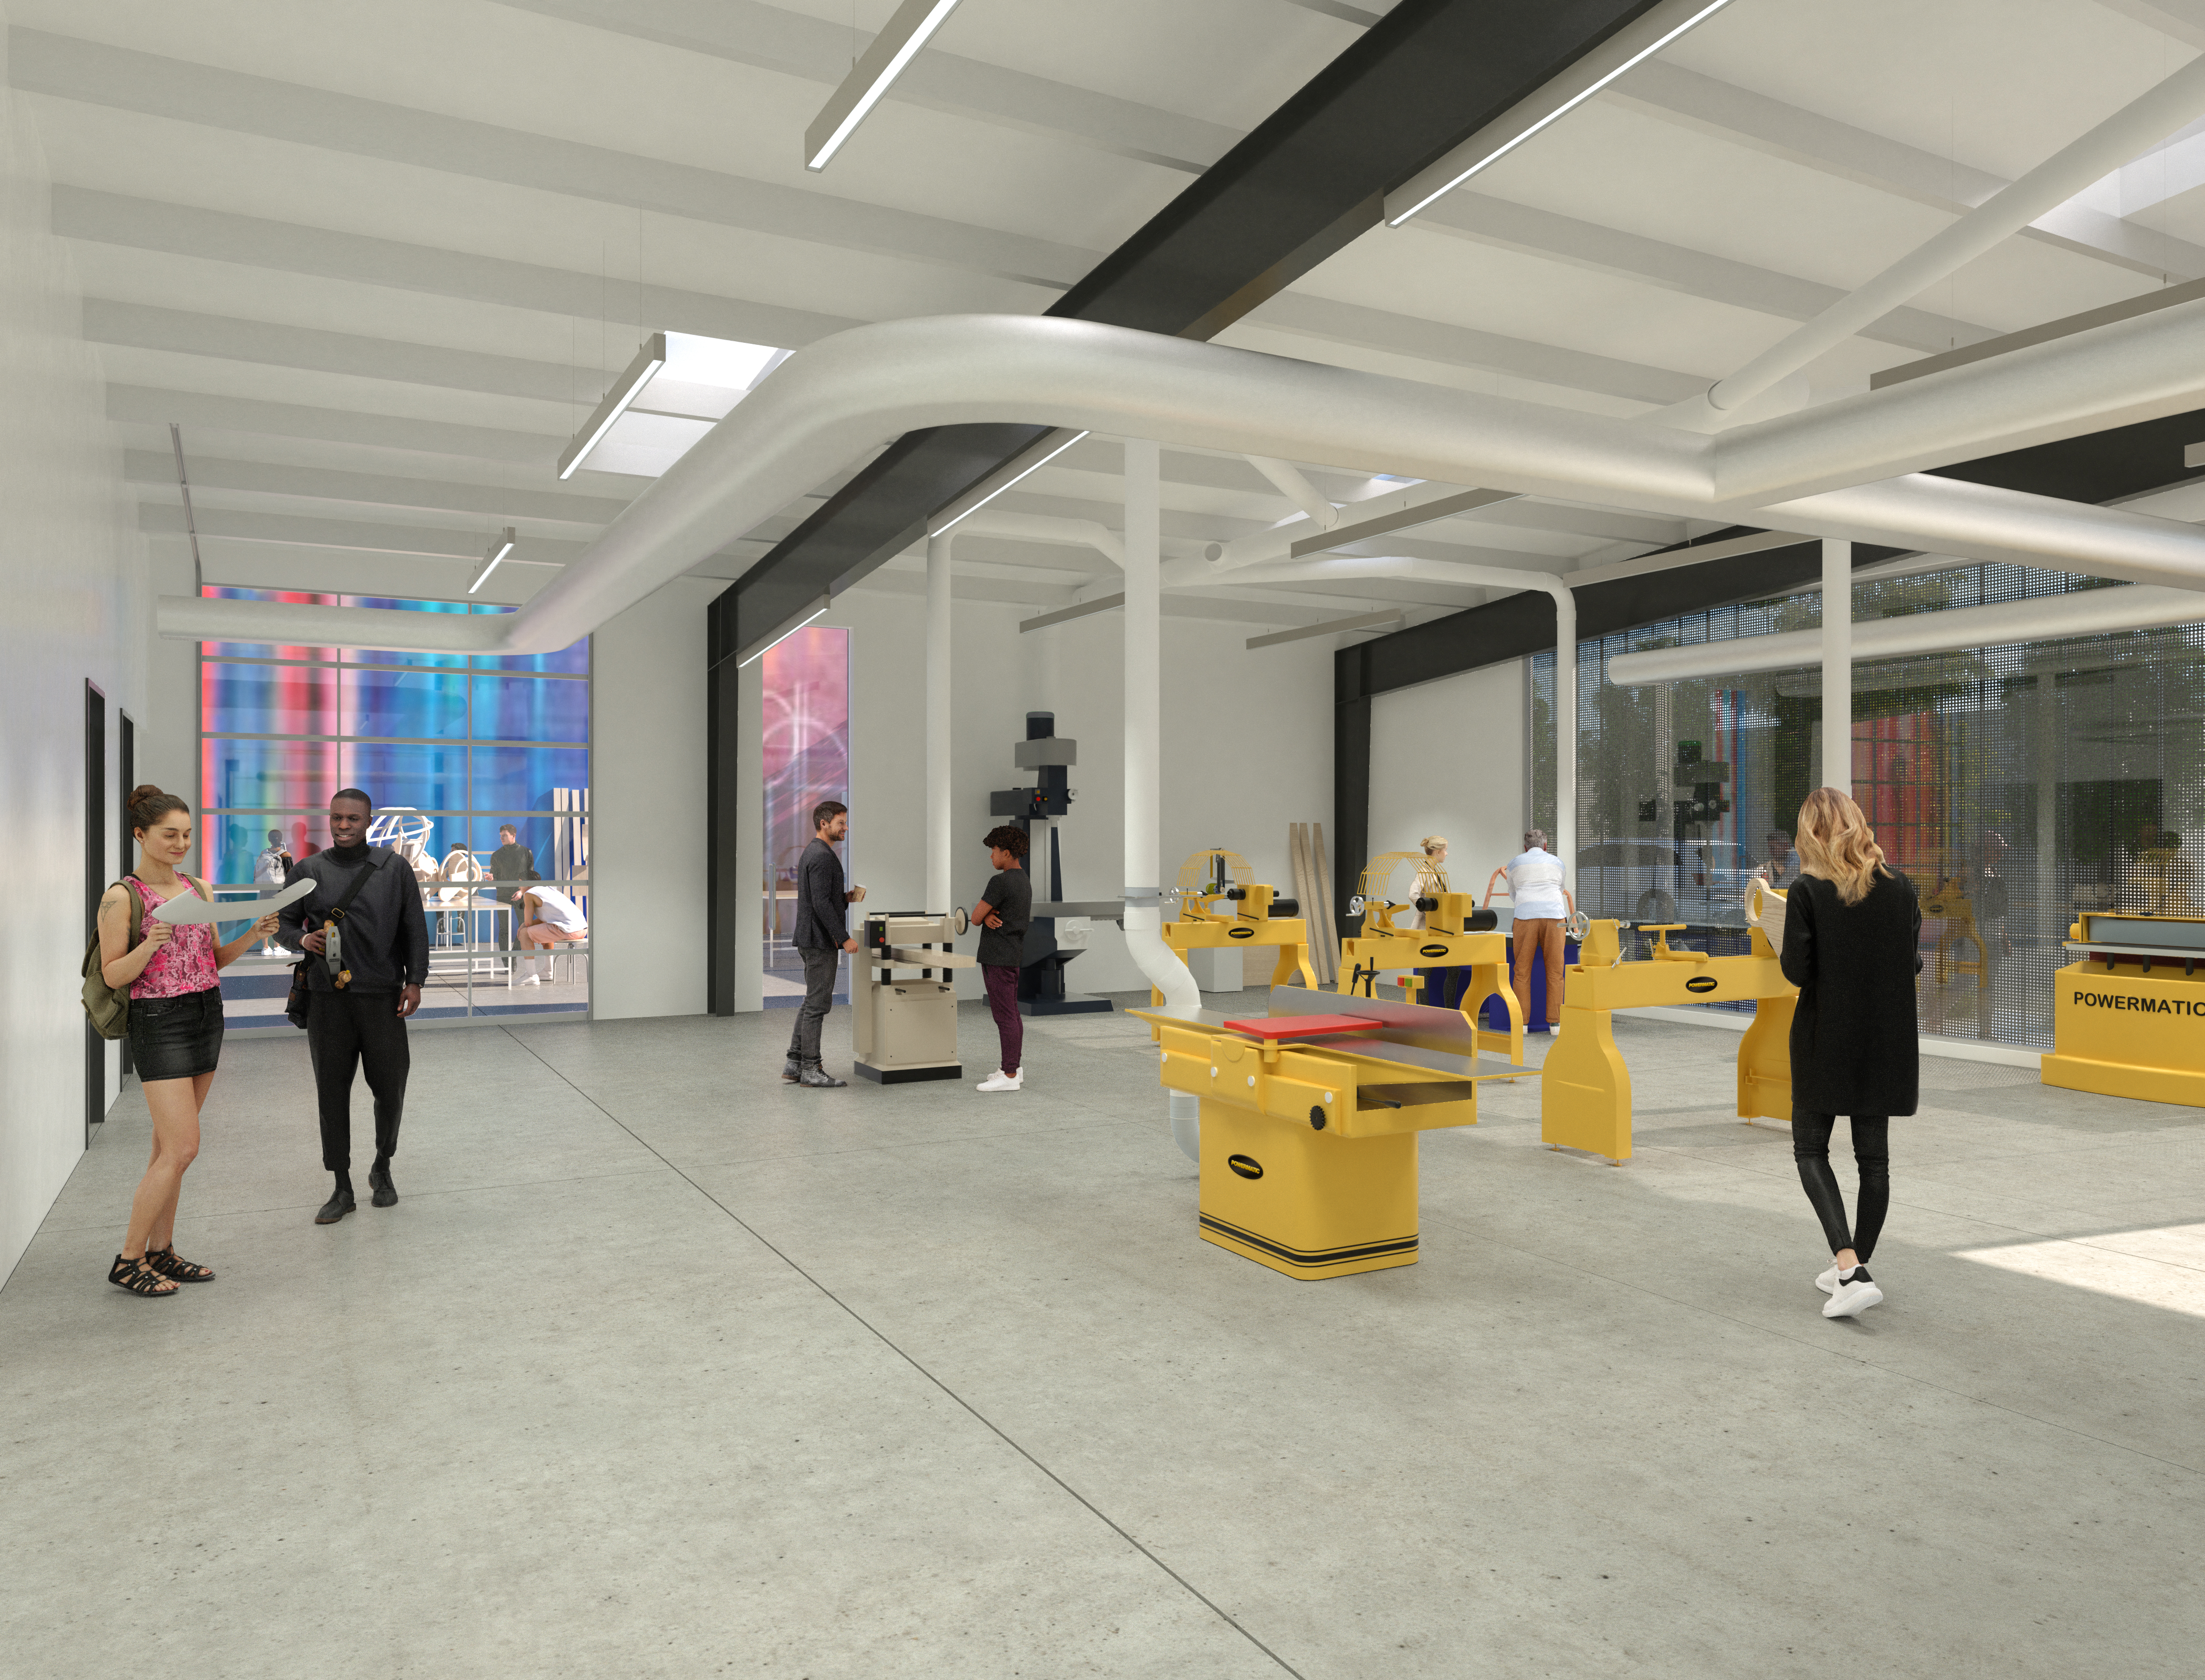 Rendering of 908 Shops, a new facility for students at ArtCenter. Interior view.